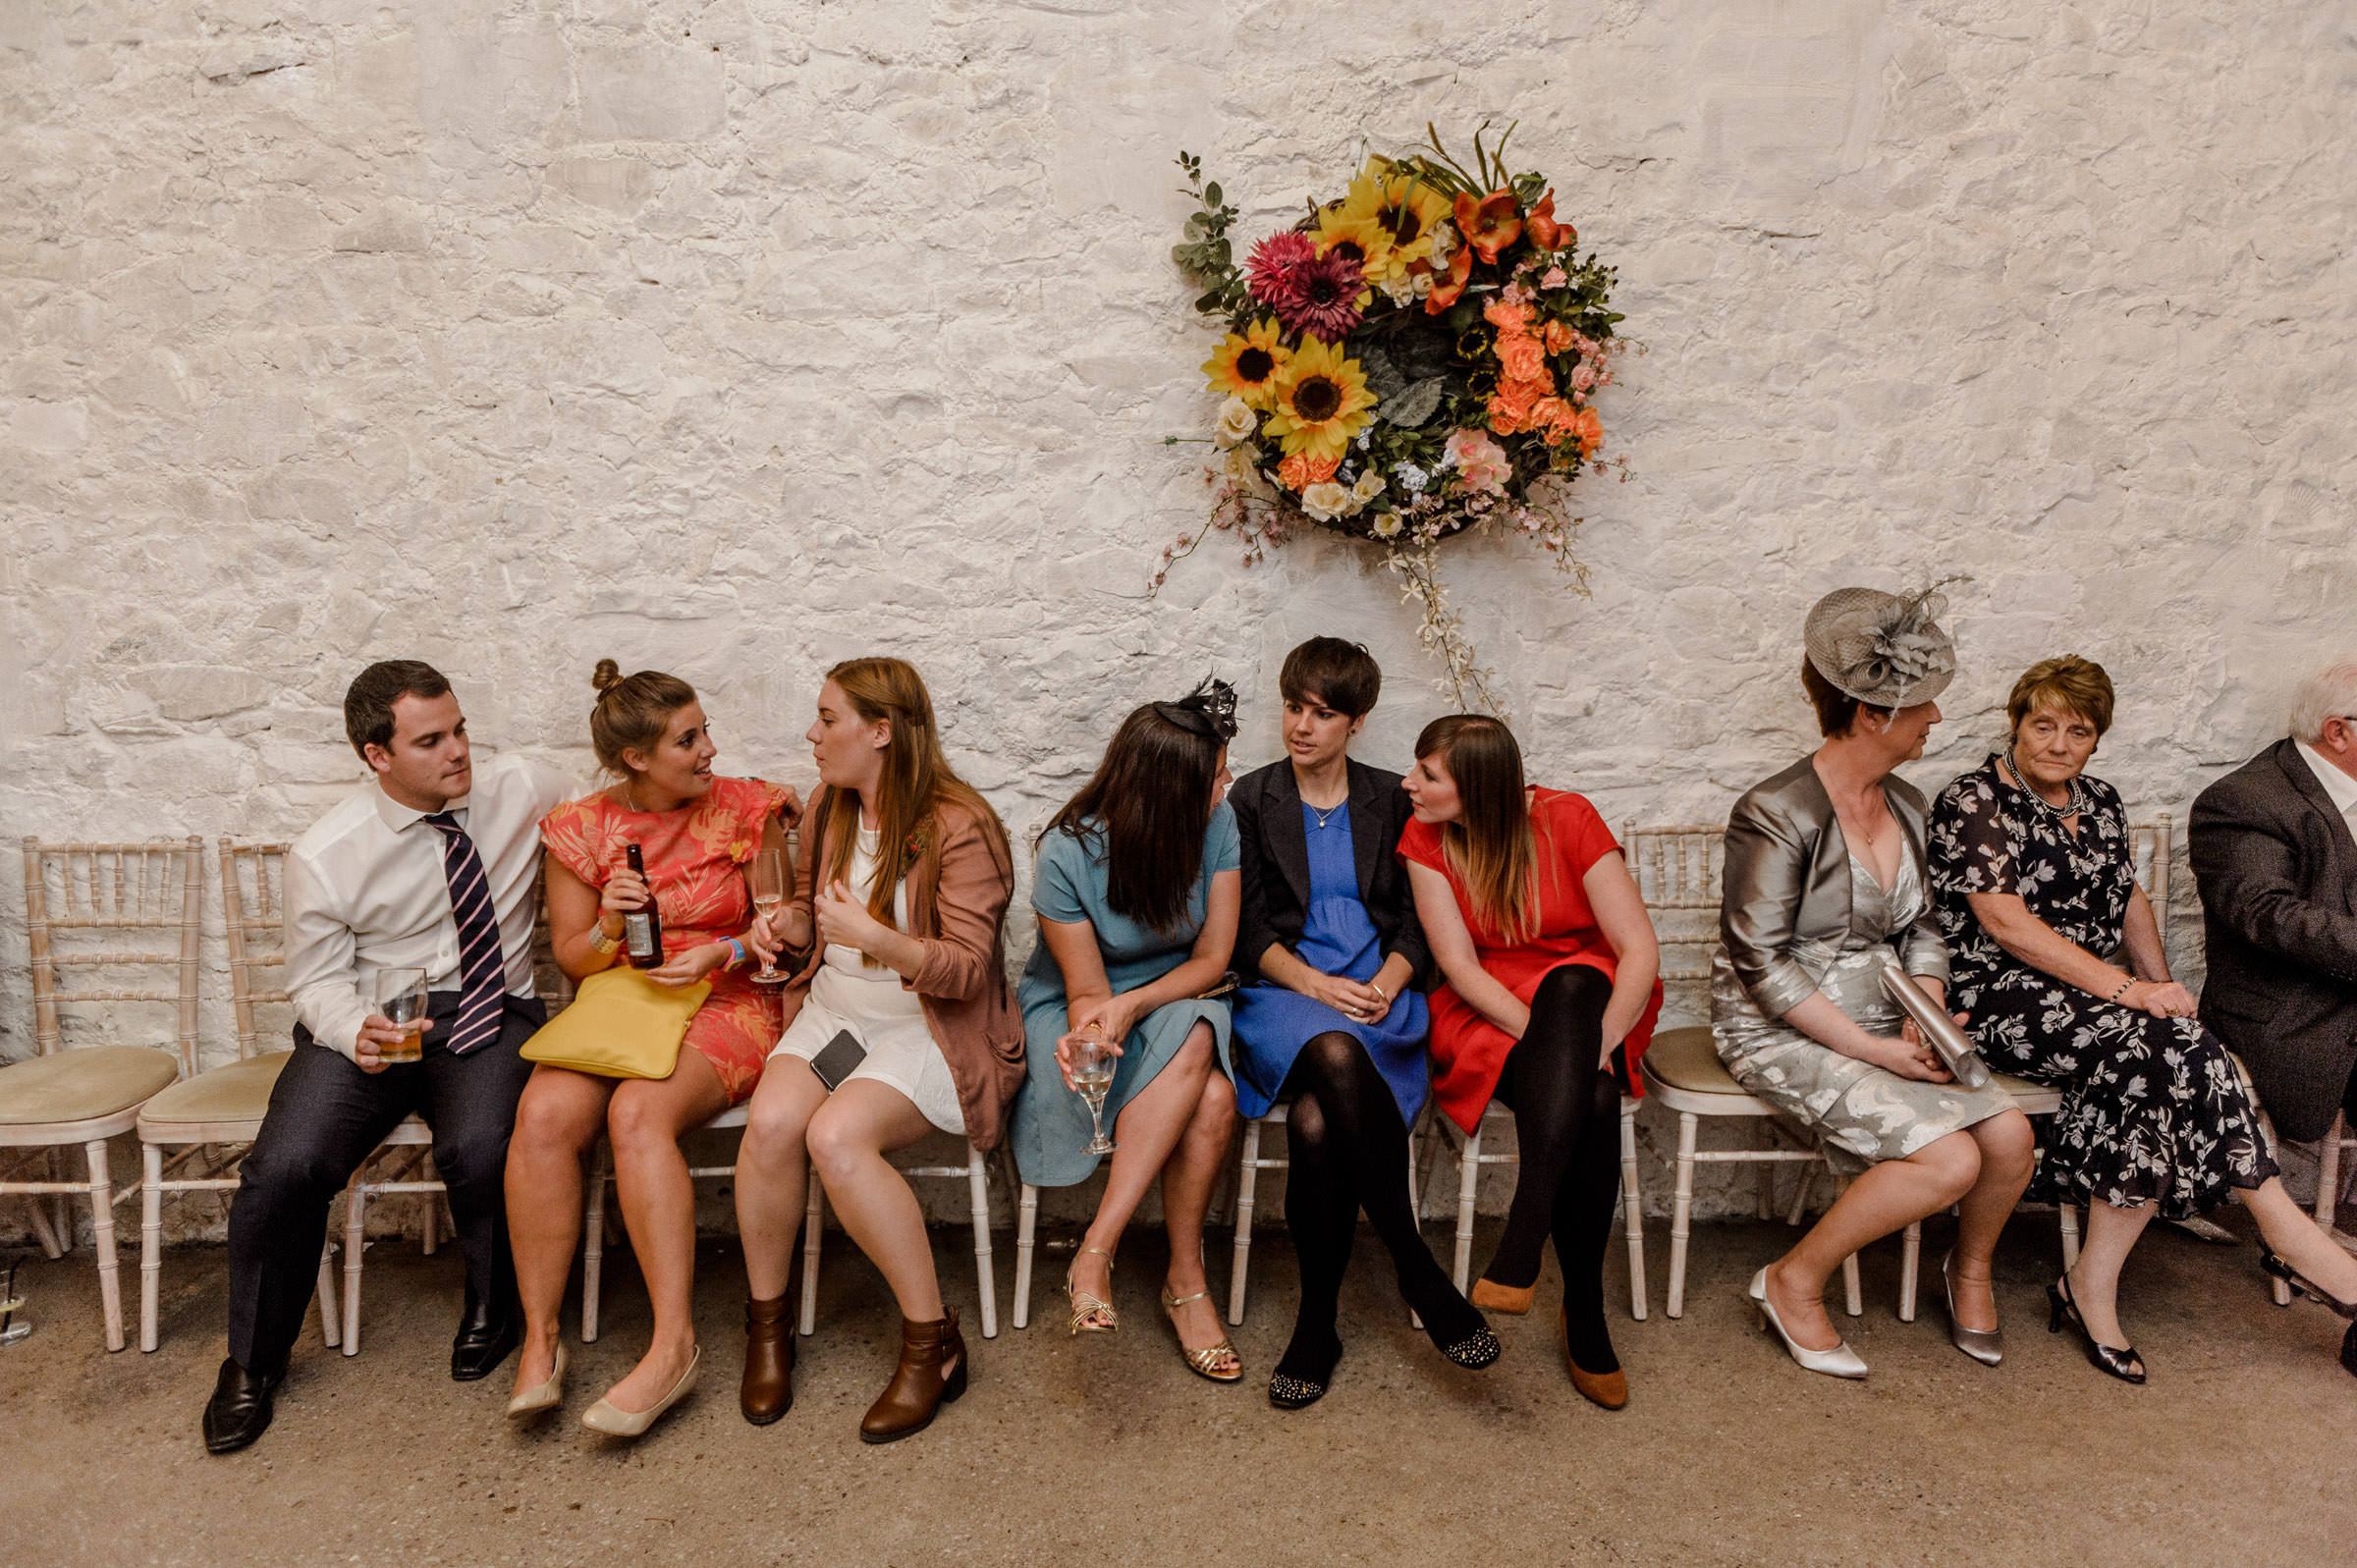 Reportage Wedding Photography South Wales 063.jpg